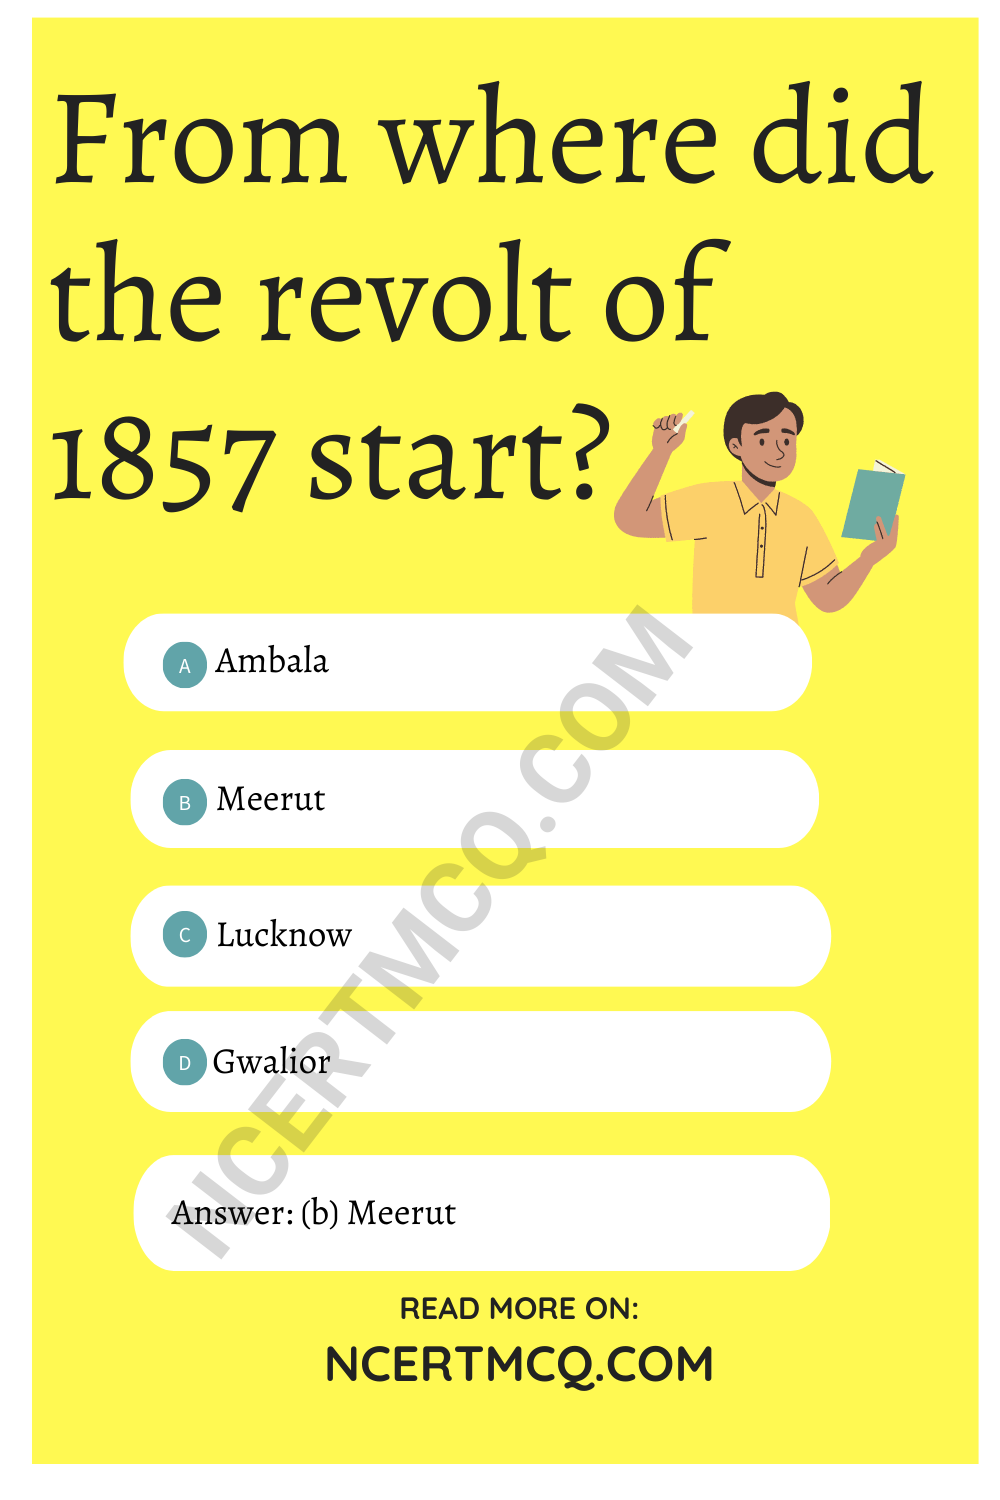 From where did the revolt of 1857 start?